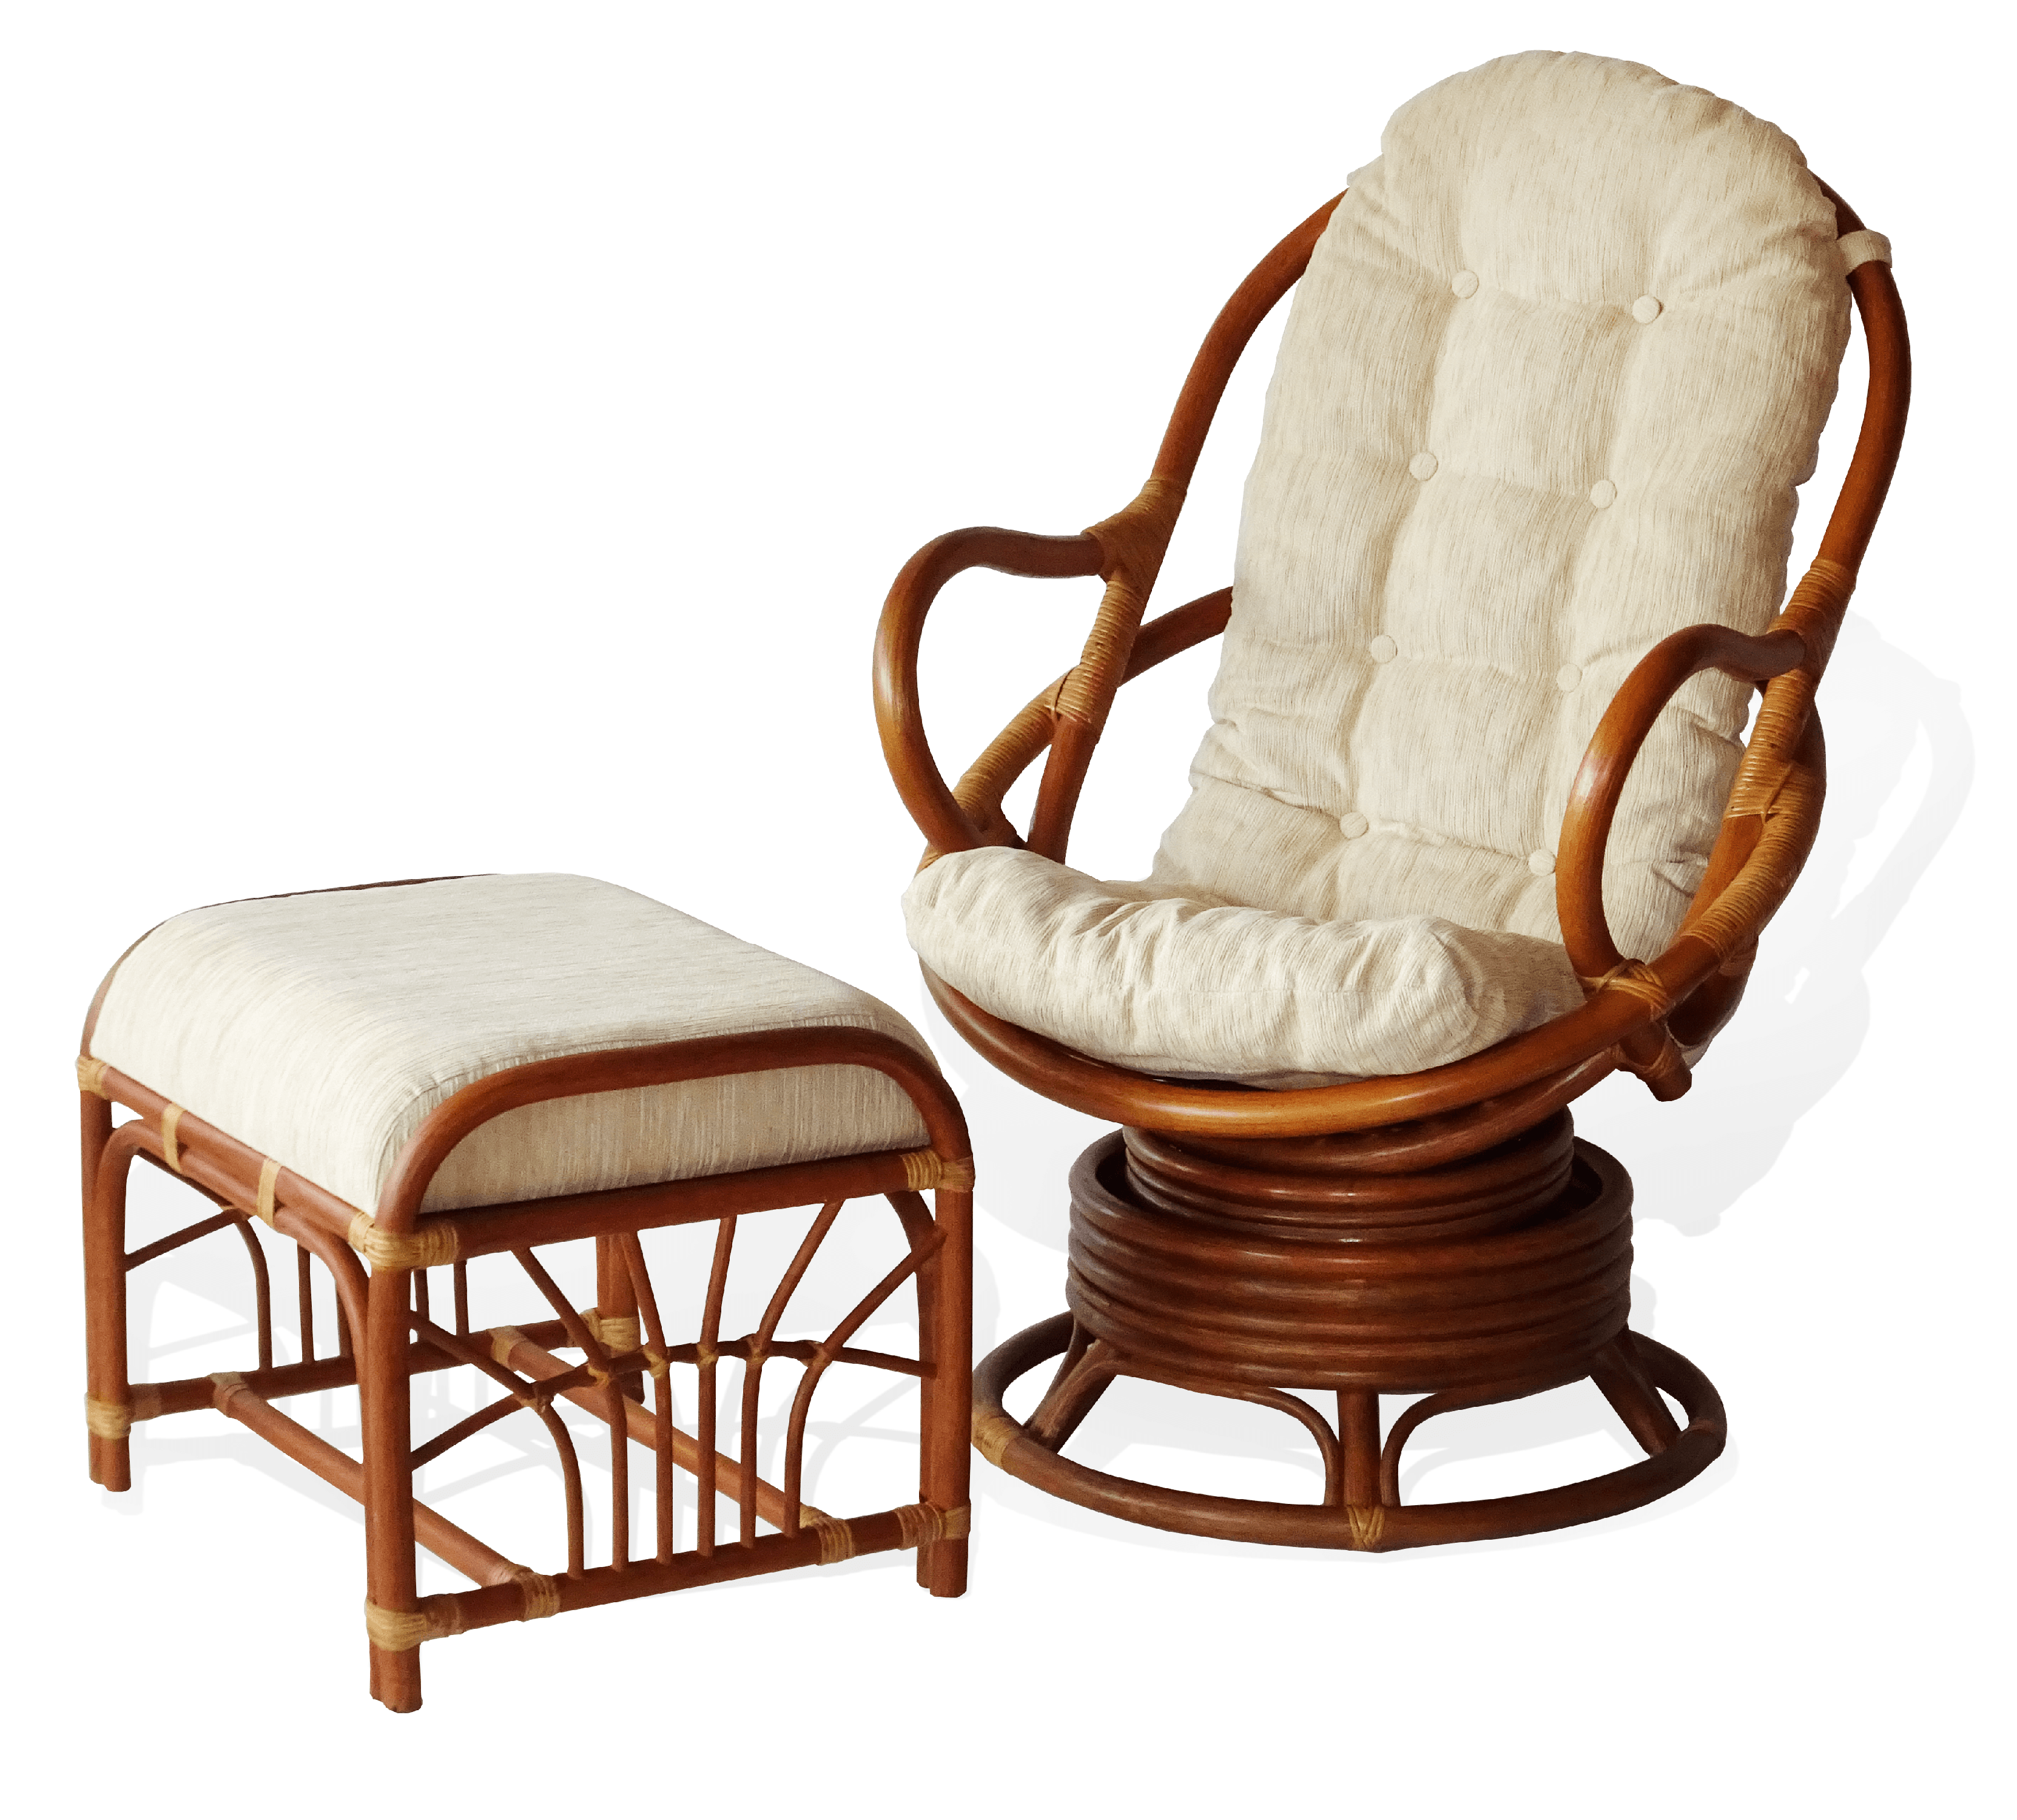 SK New Interiors Set of 2 Java Swivel Rocking Lounge Chair Natural Rattan Wicker with Cream Cushion and Round Coffee Table, Colonial - image 1 of 5